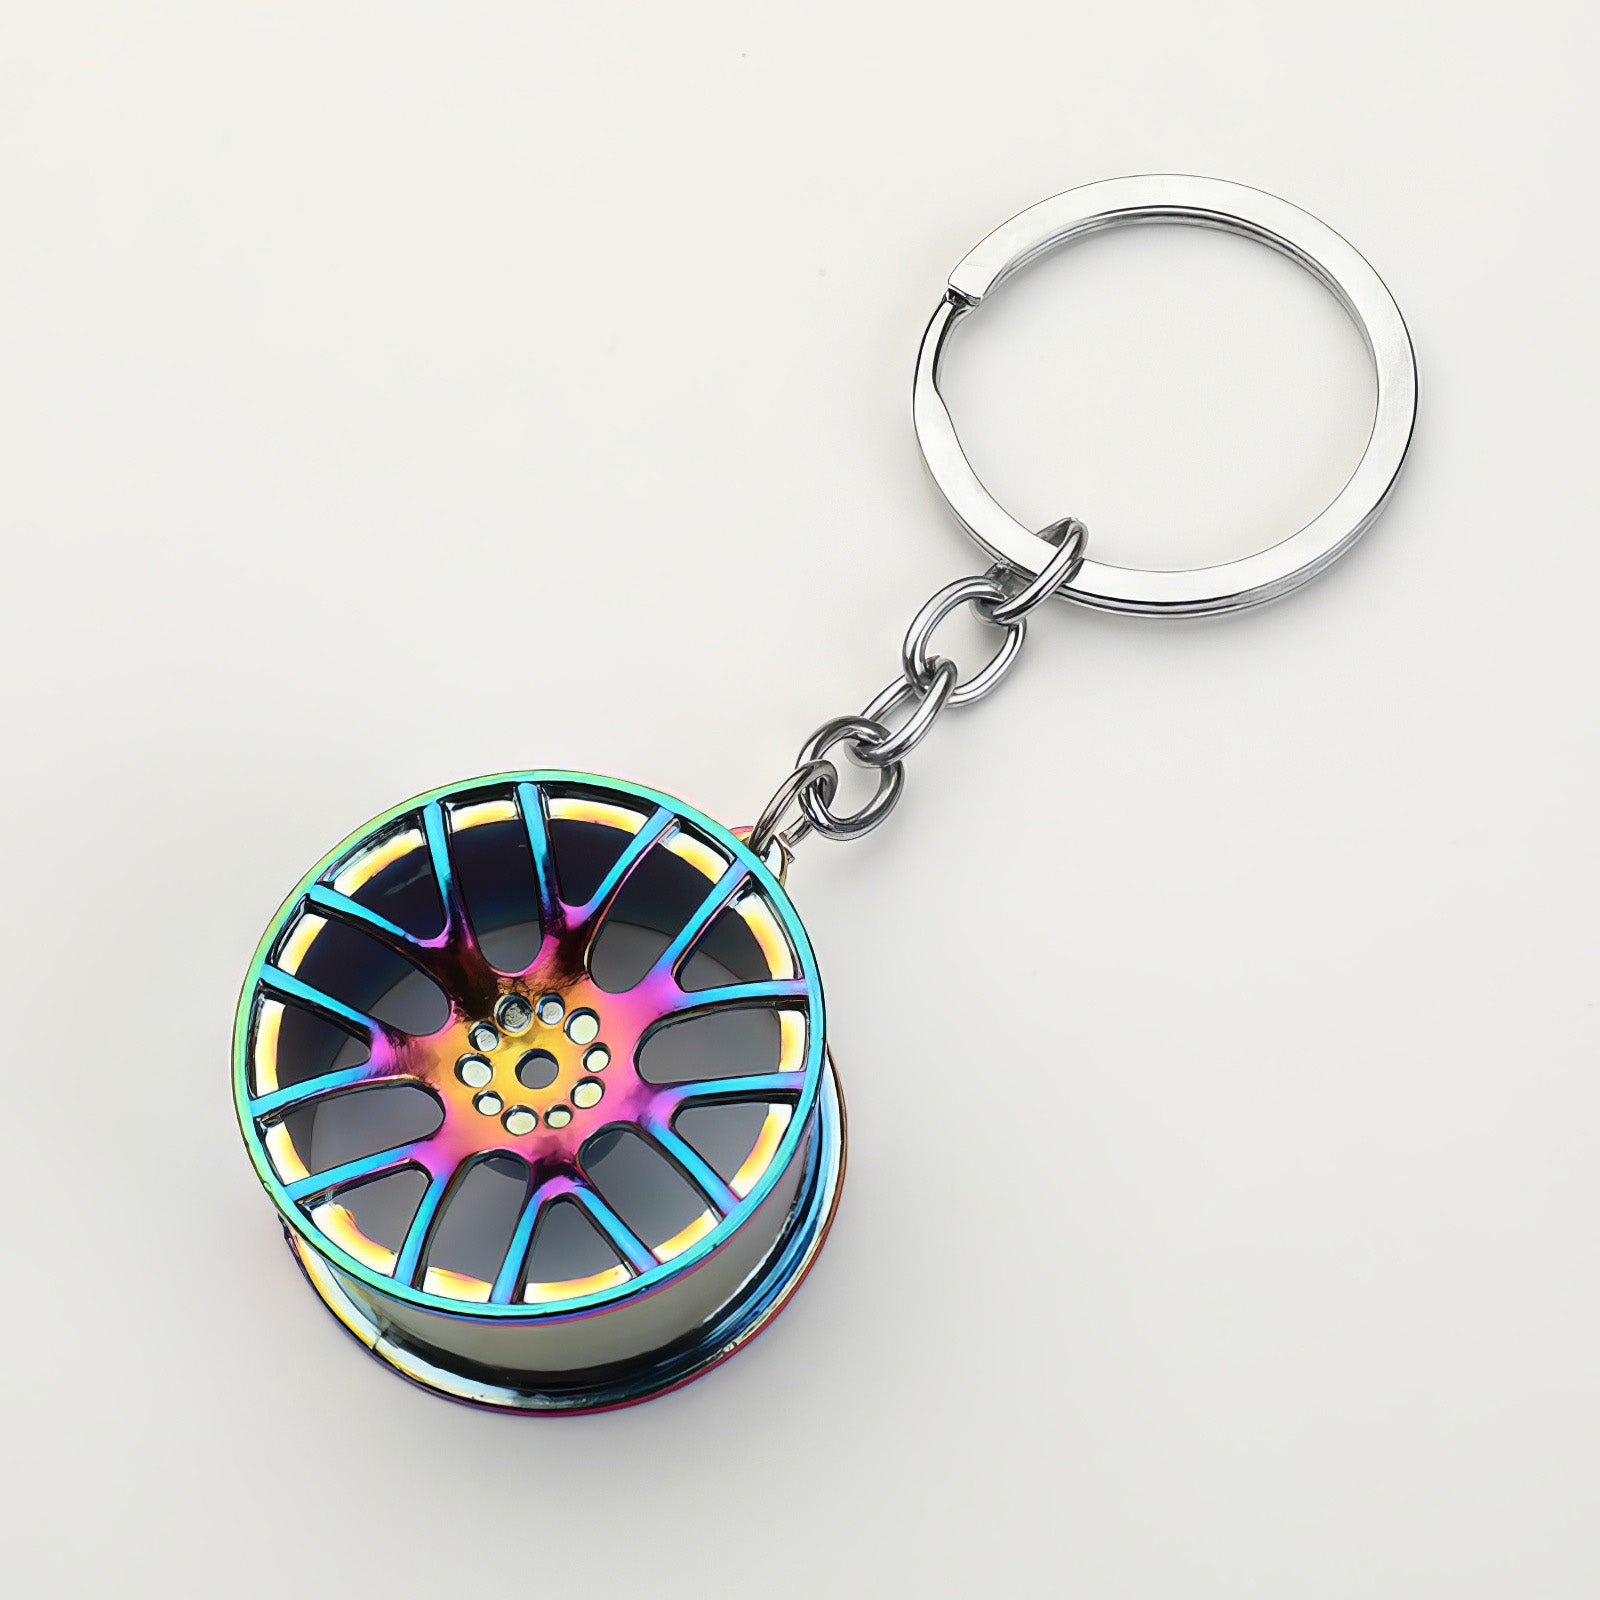 Concave wheel keychain in neochrome.